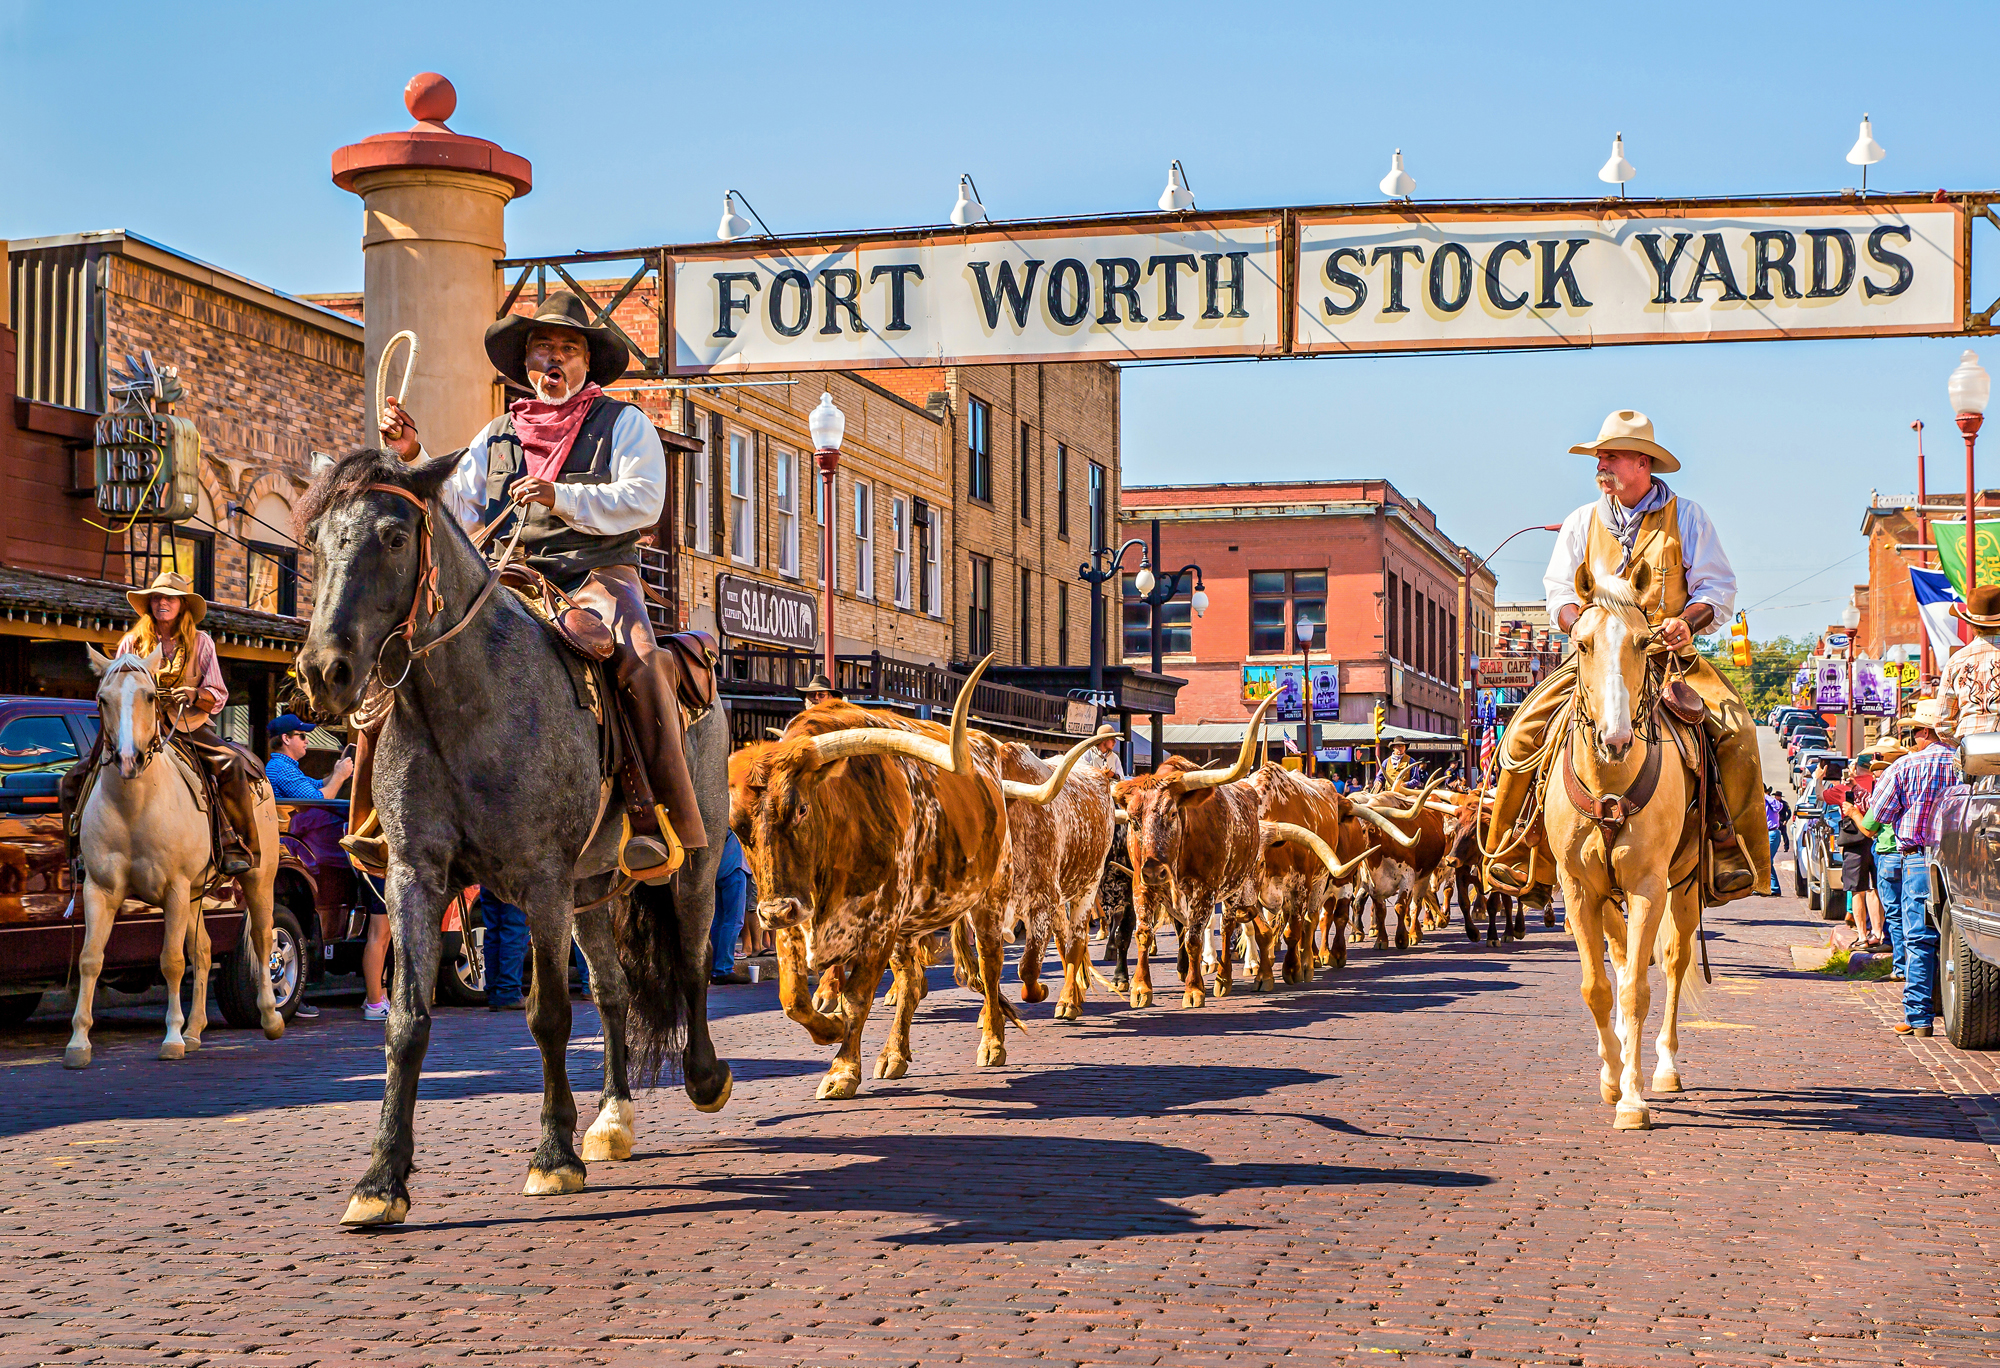 A day at Fort Worth Stockyards, Texas - Our World for You